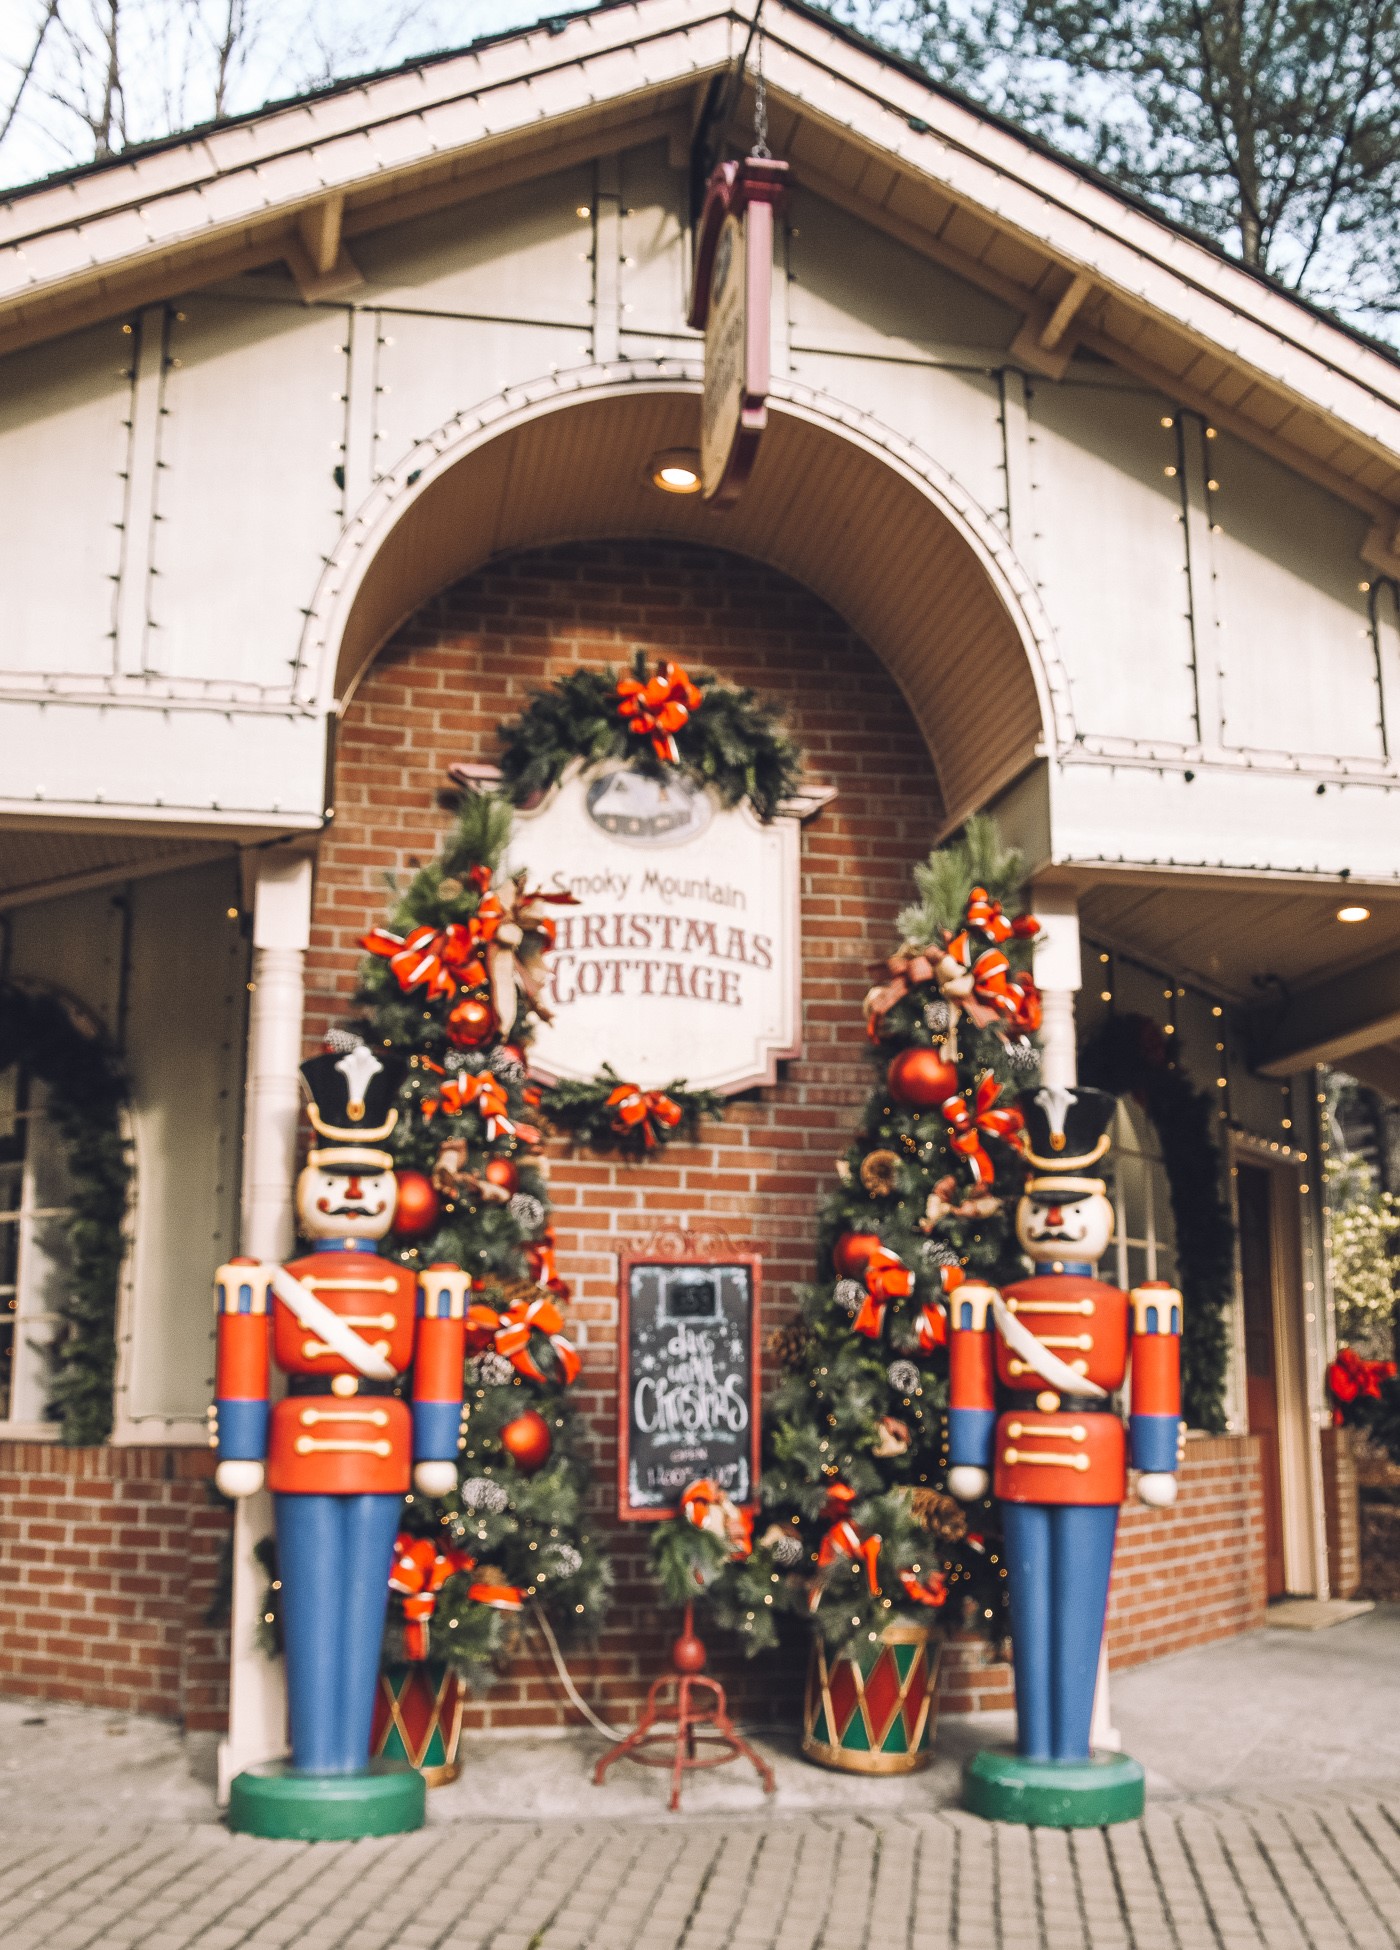 Everything You Need To Know About Christmas at Dollywood + Tips For Any Time of Year